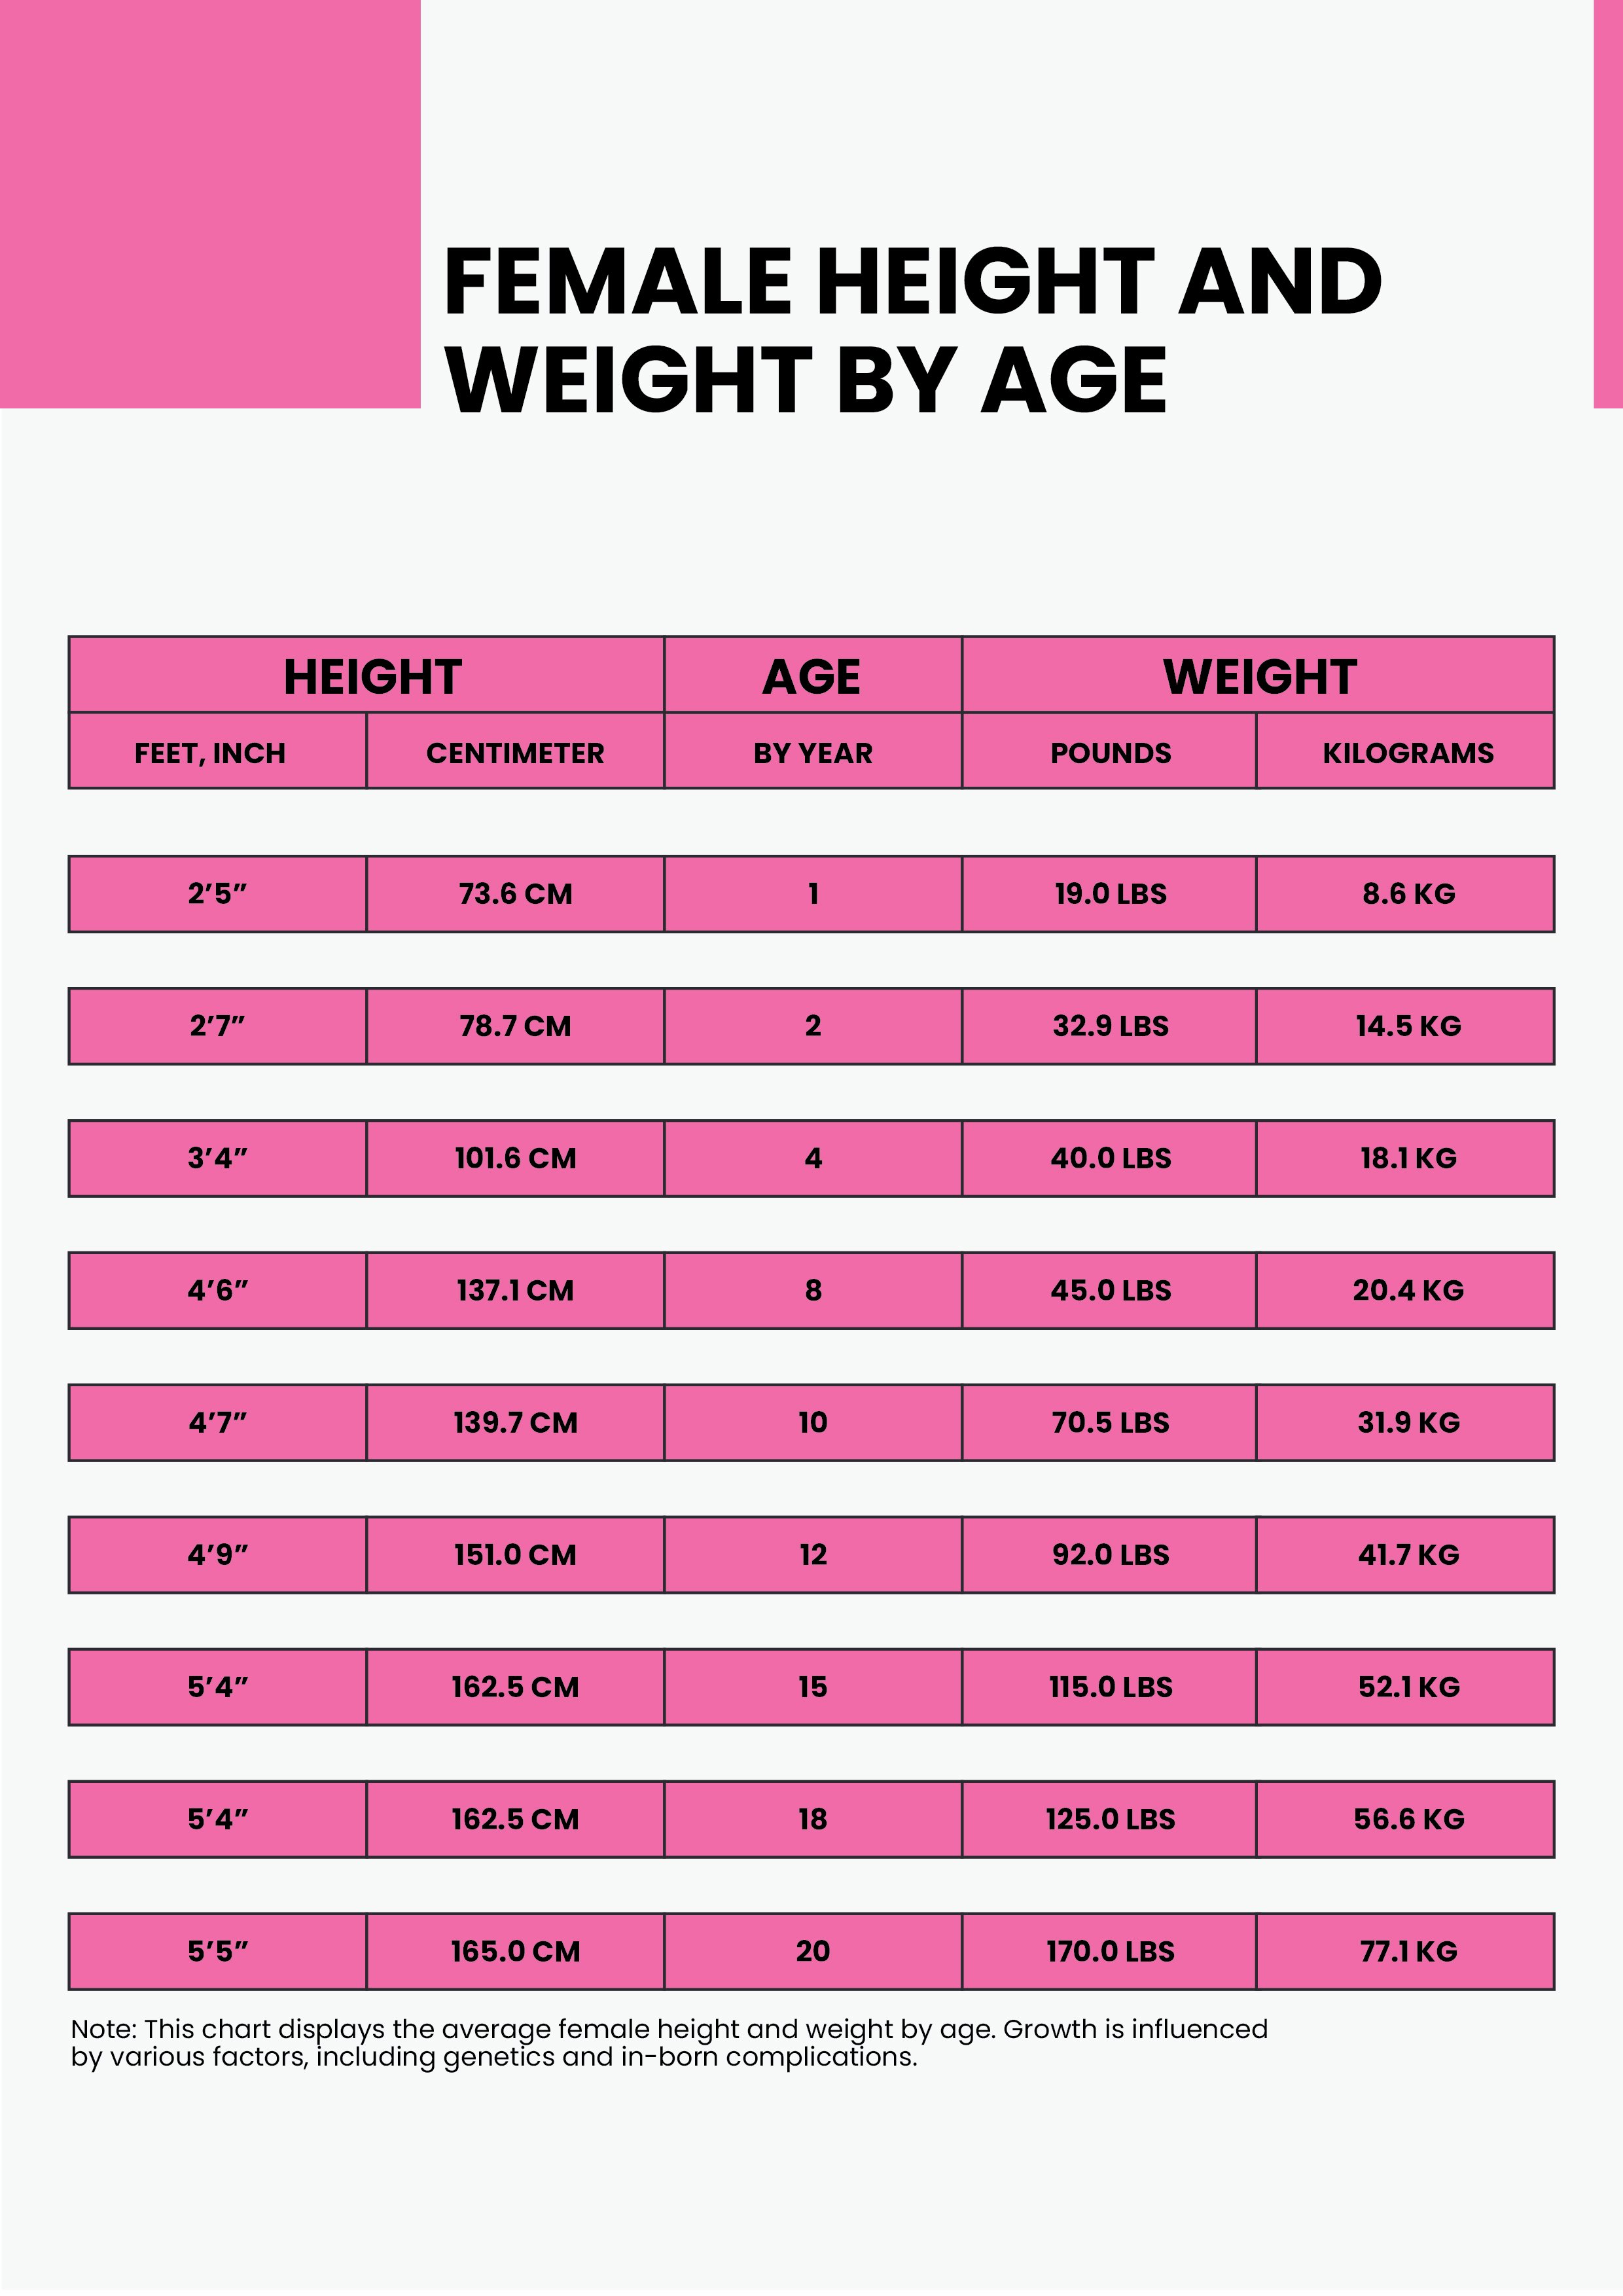 Free Female Age Height Weight Chart - Download in PDF | Template.net